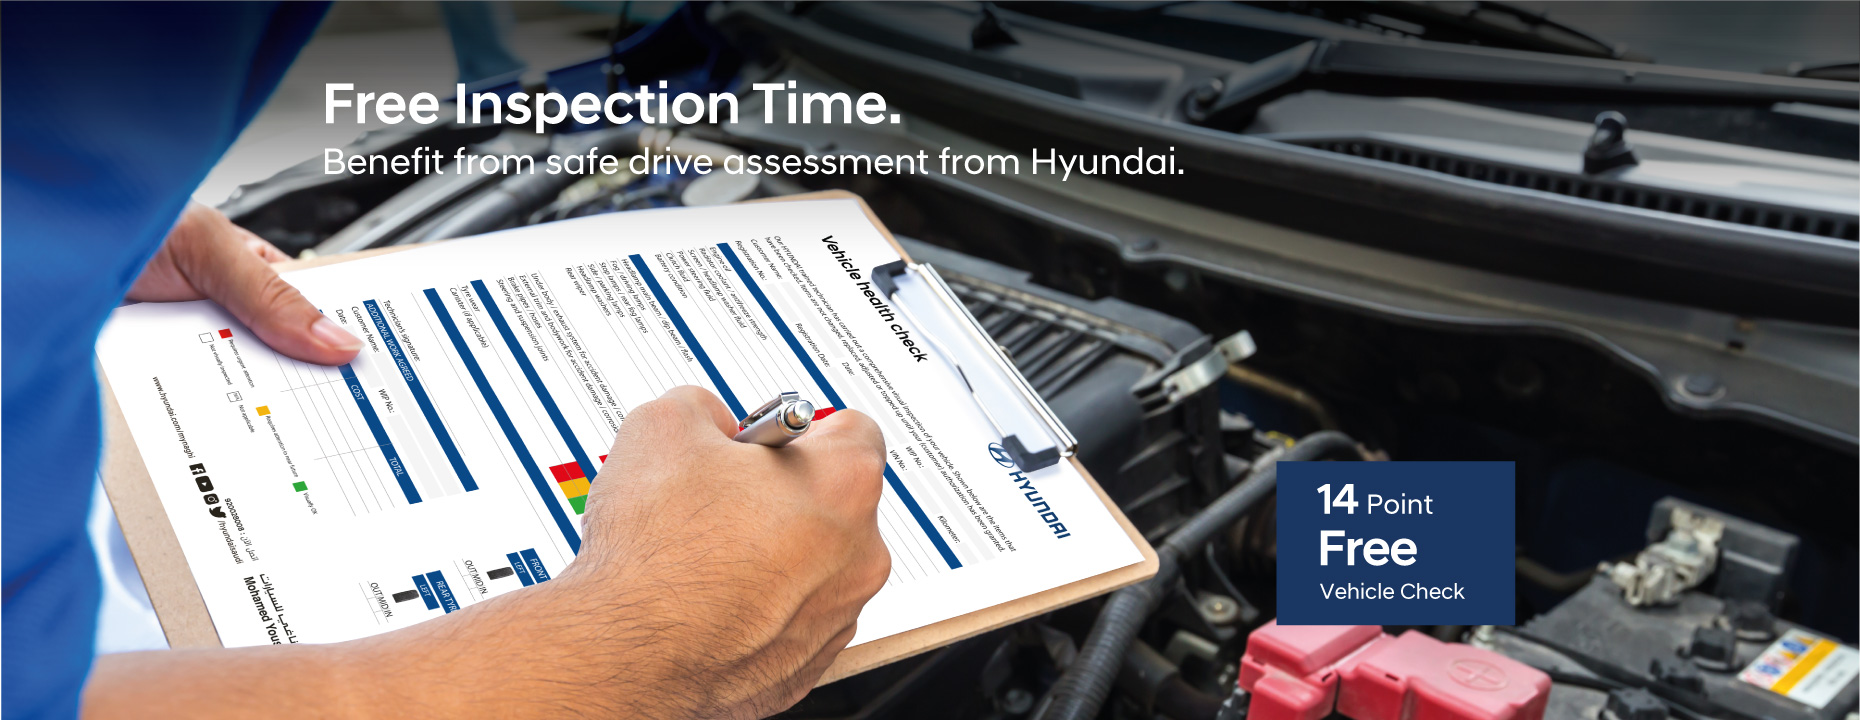 Free inspection time. Benefit from safe drive assessment from Hyundai.